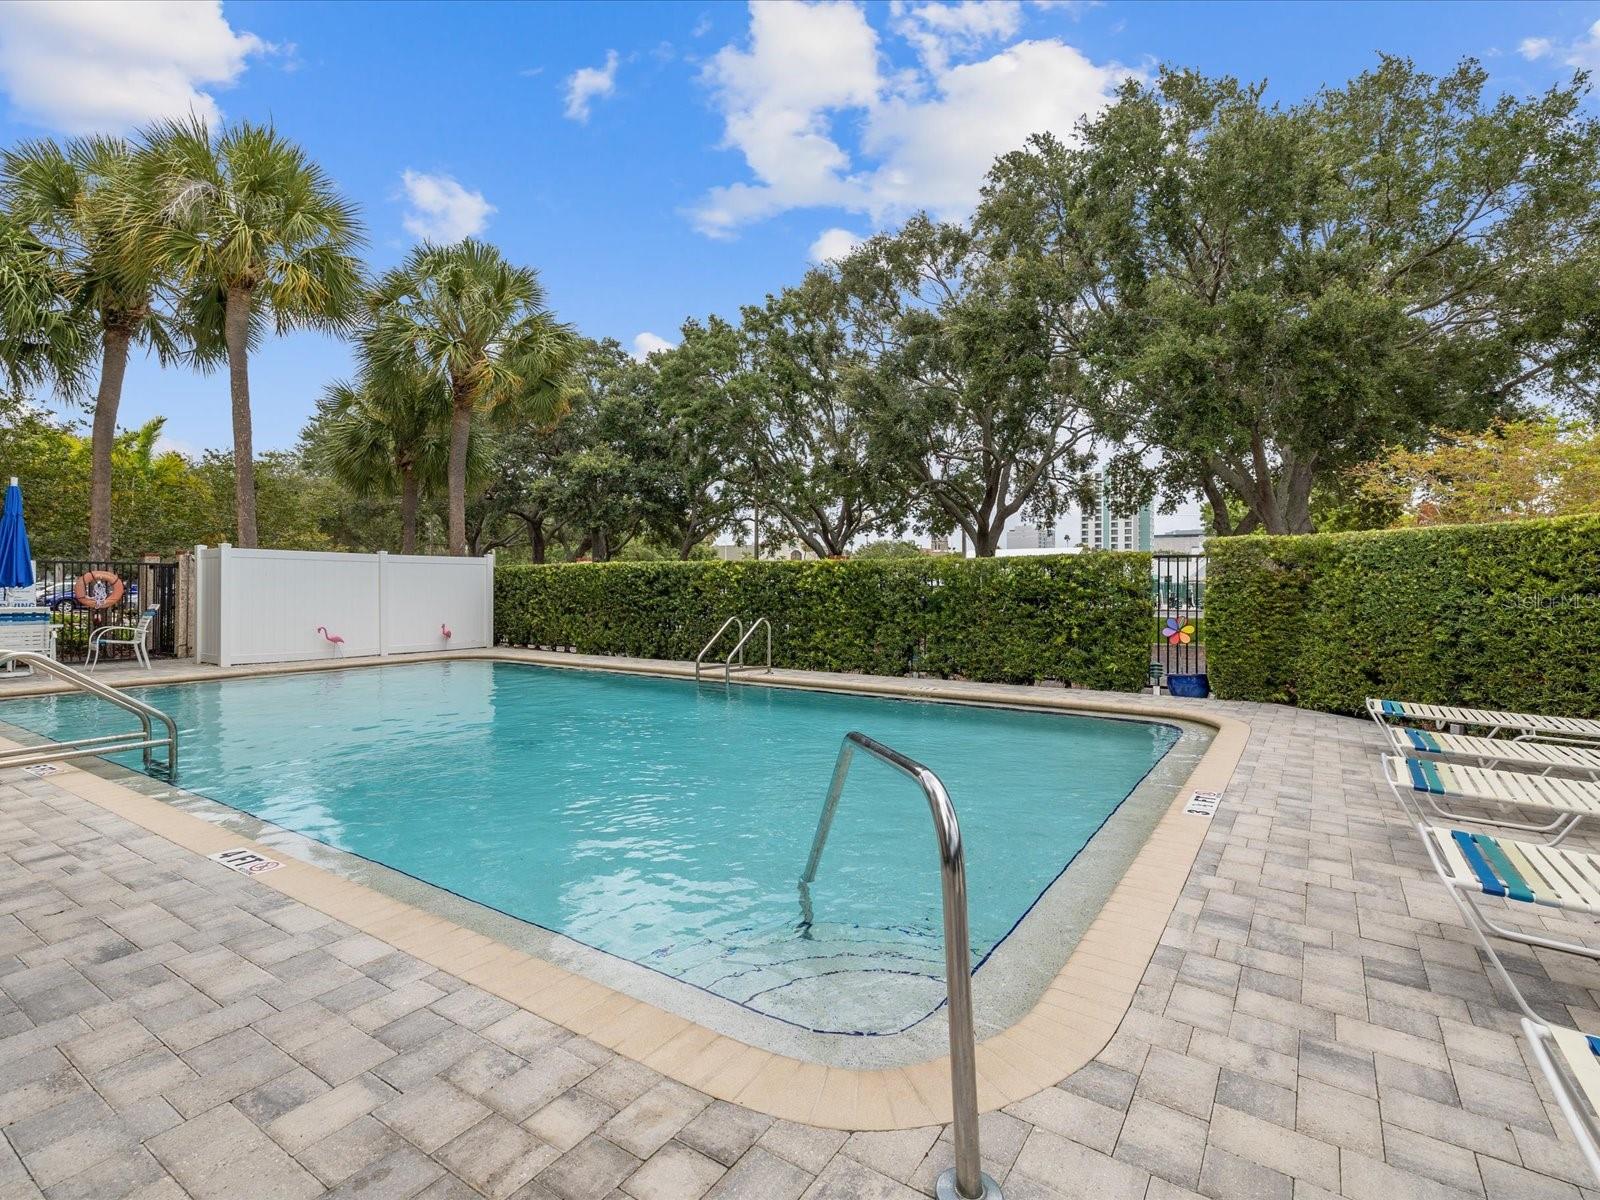 Beautiful Pool Area with Pavers. Private and Secure !! The Pool is great for Exercise or Relaxation !!